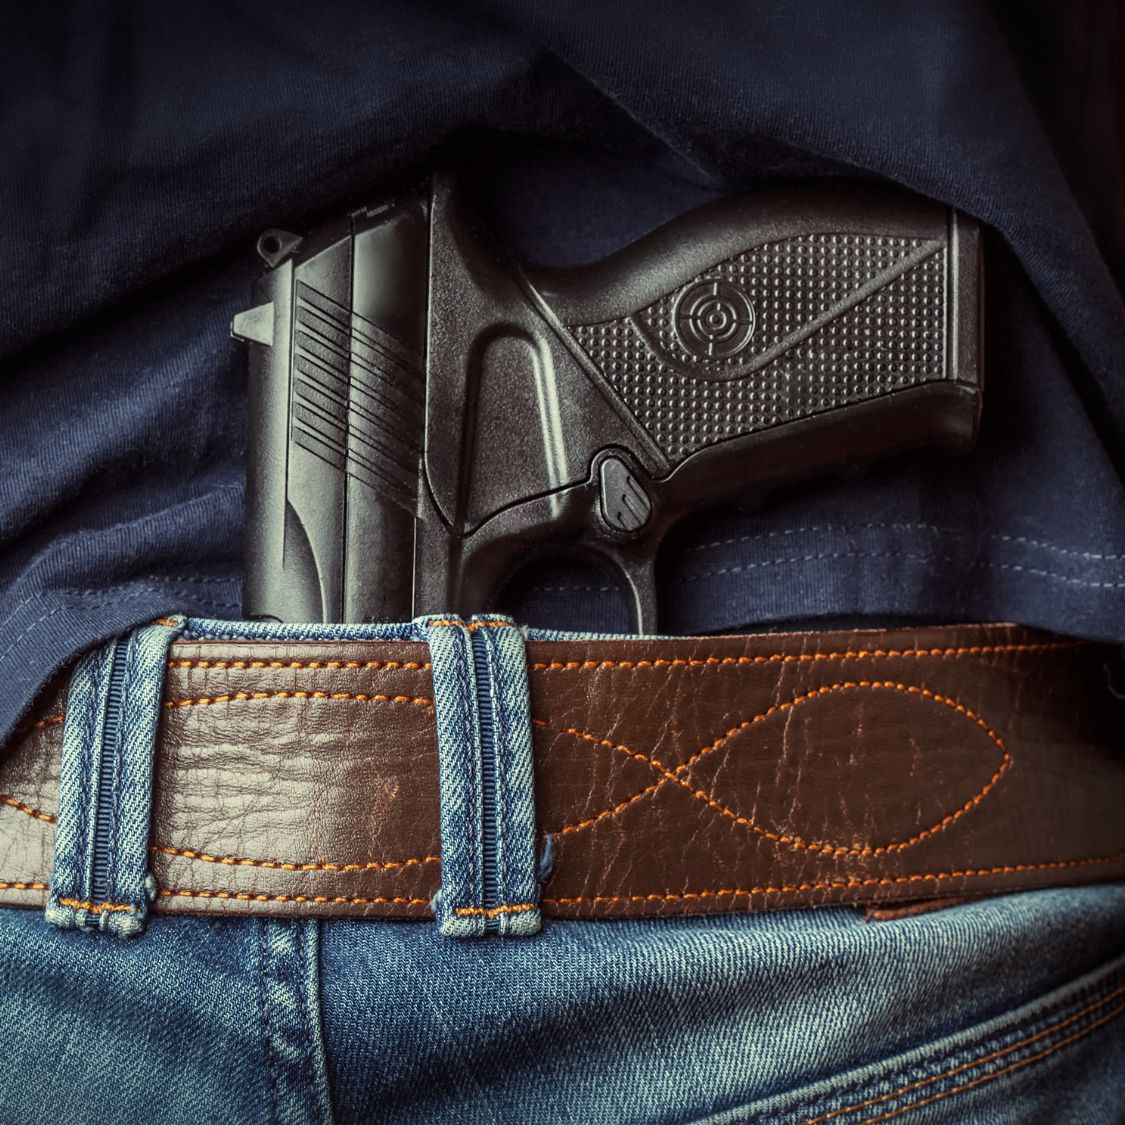 How To Avoid Common Mistakes While You Conceal Carry